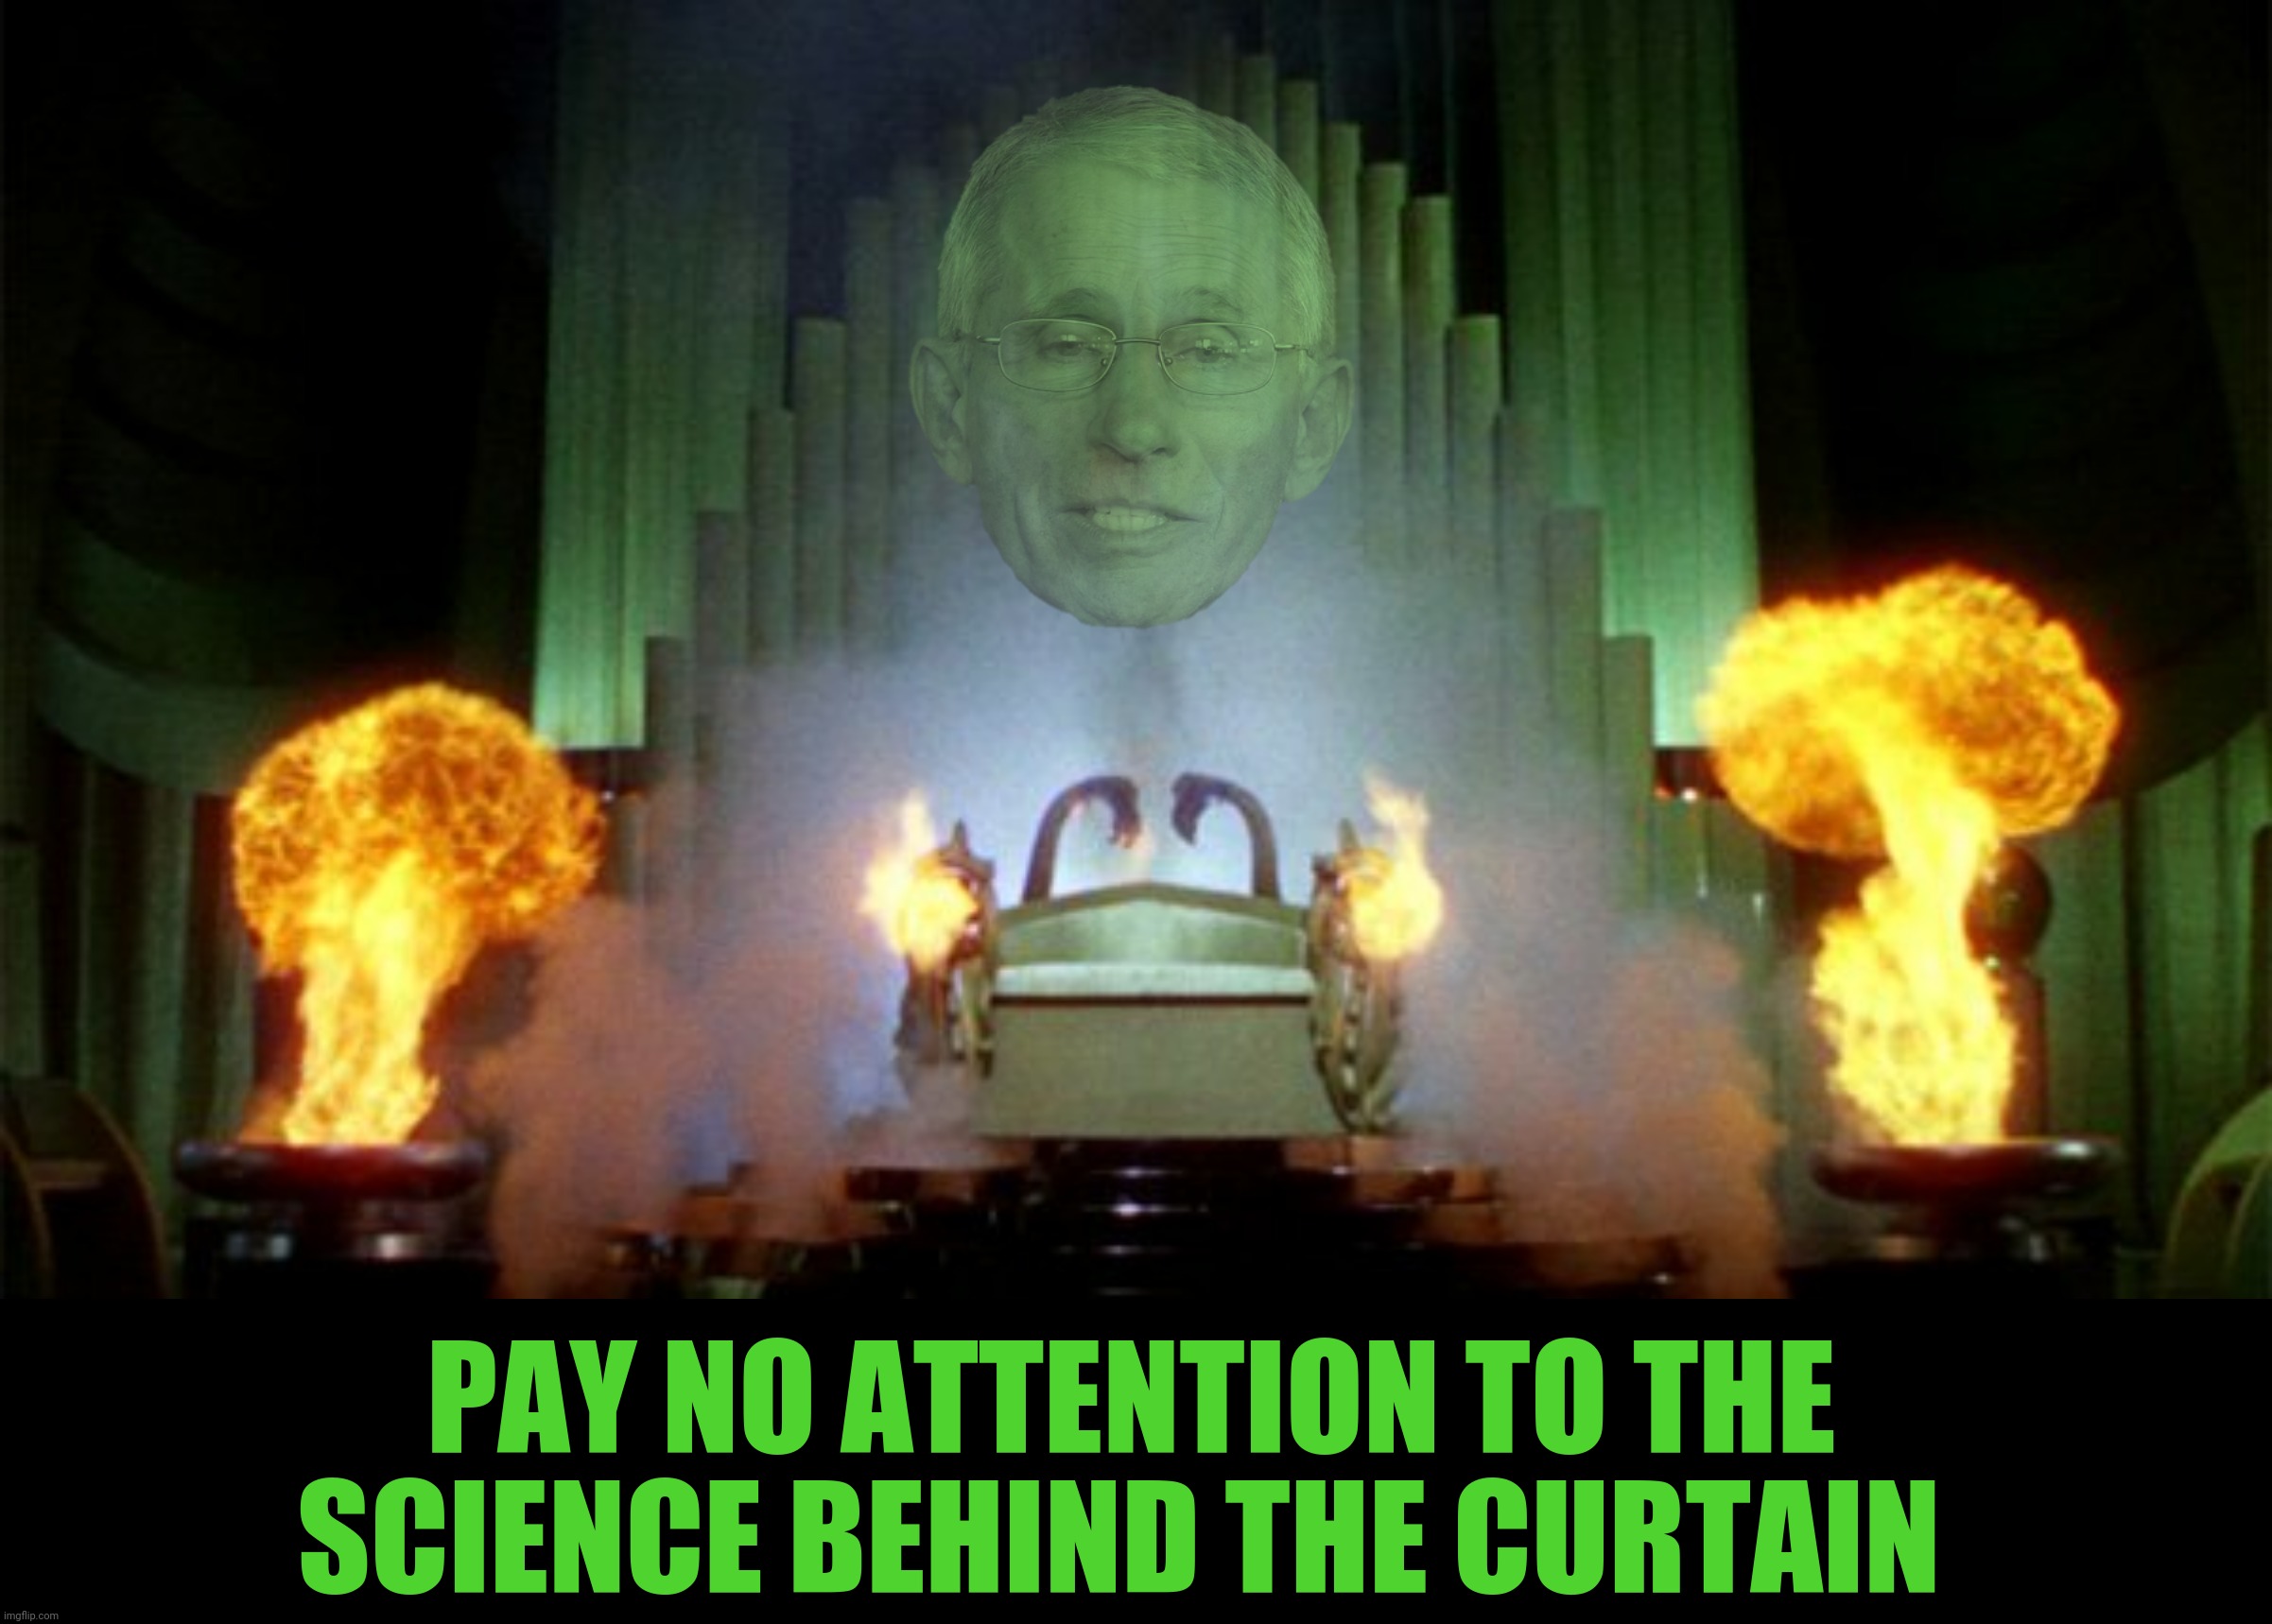 PAY NO ATTENTION TO THE SCIENCE BEHIND THE CURTAIN | made w/ Imgflip meme maker